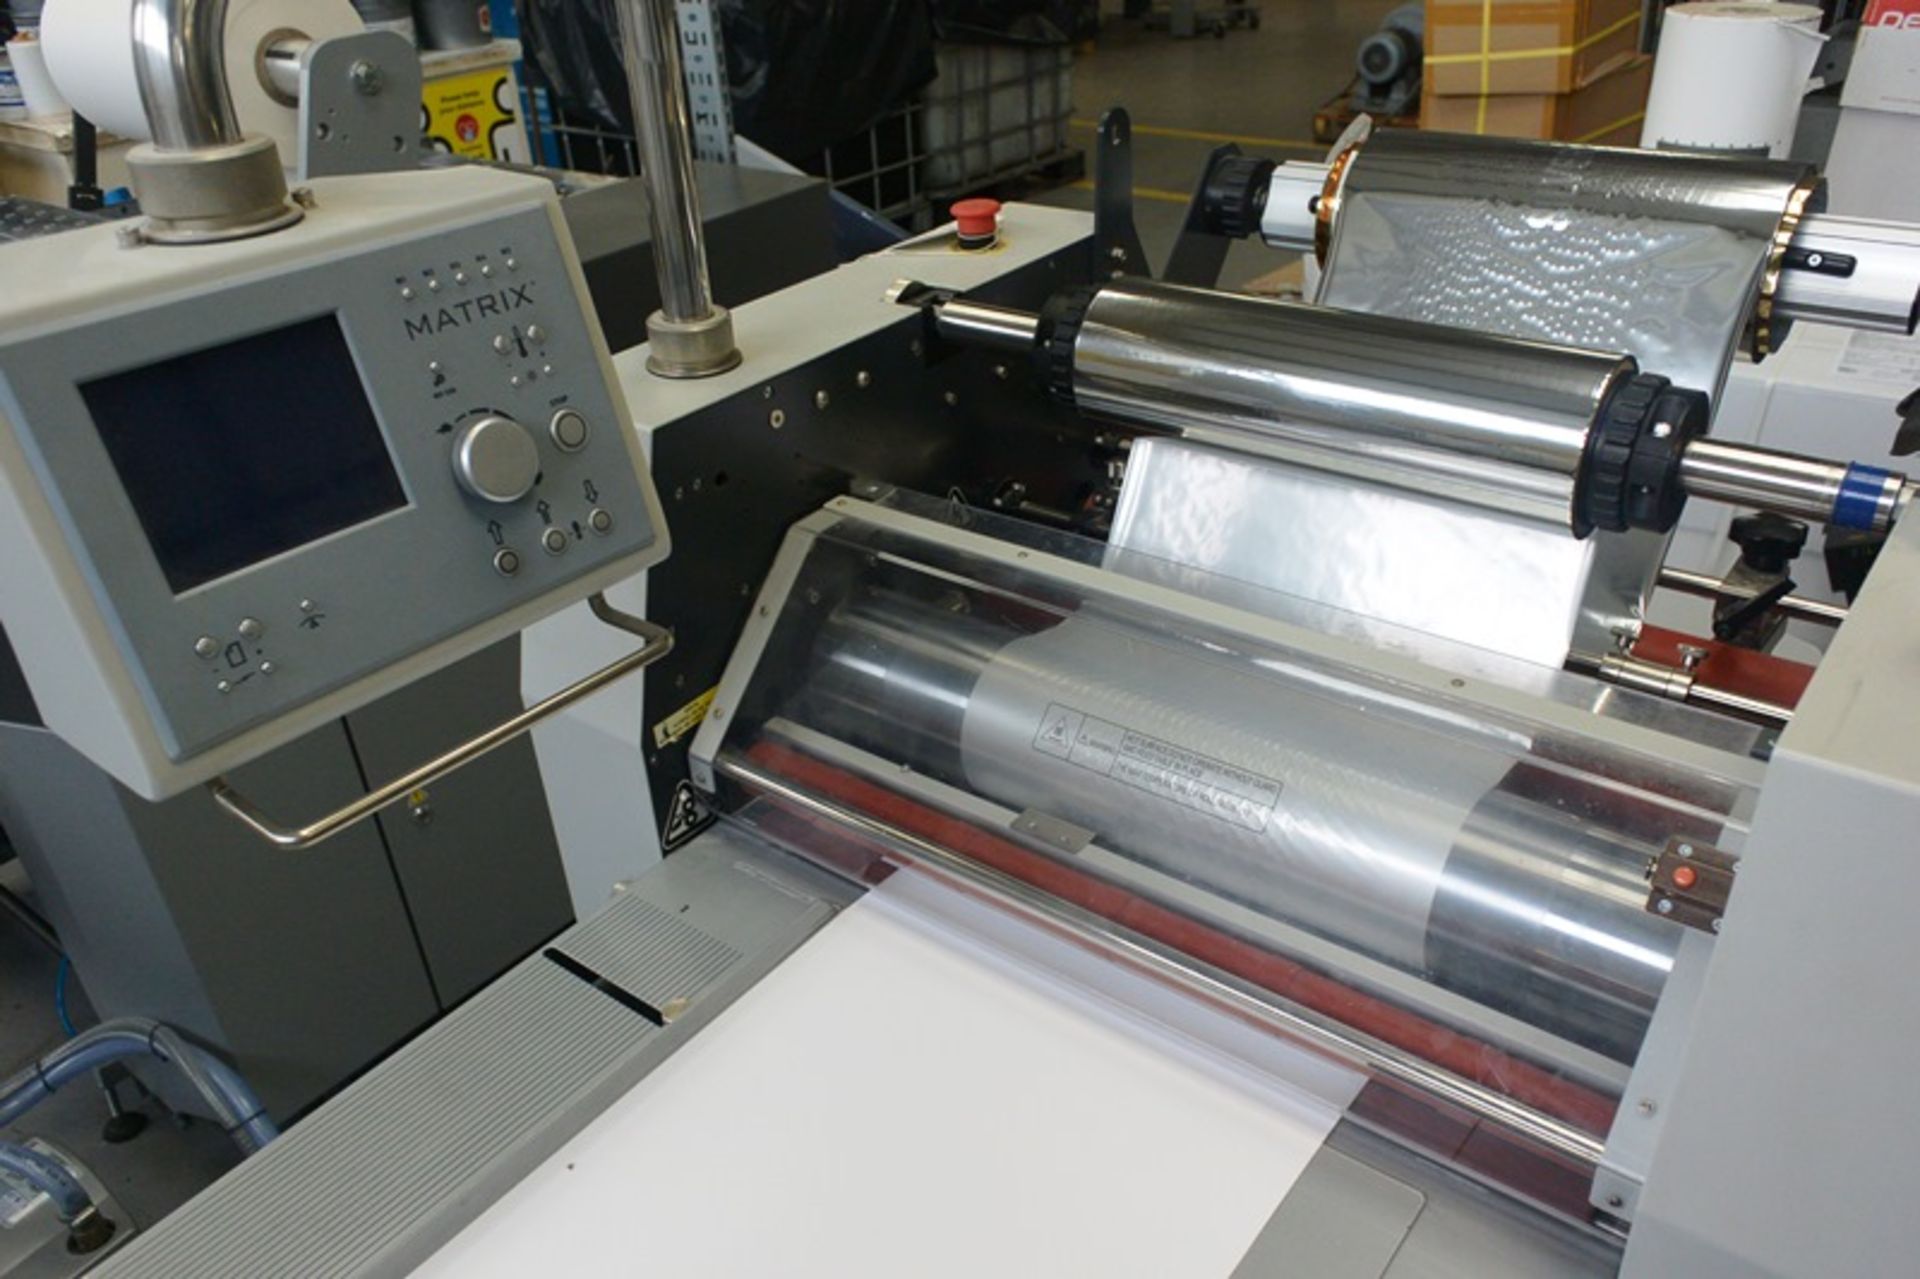 Matrix 530 reel feed continuous single sided laminating machine, model MX-530P, serial no. 1312- - Image 5 of 7